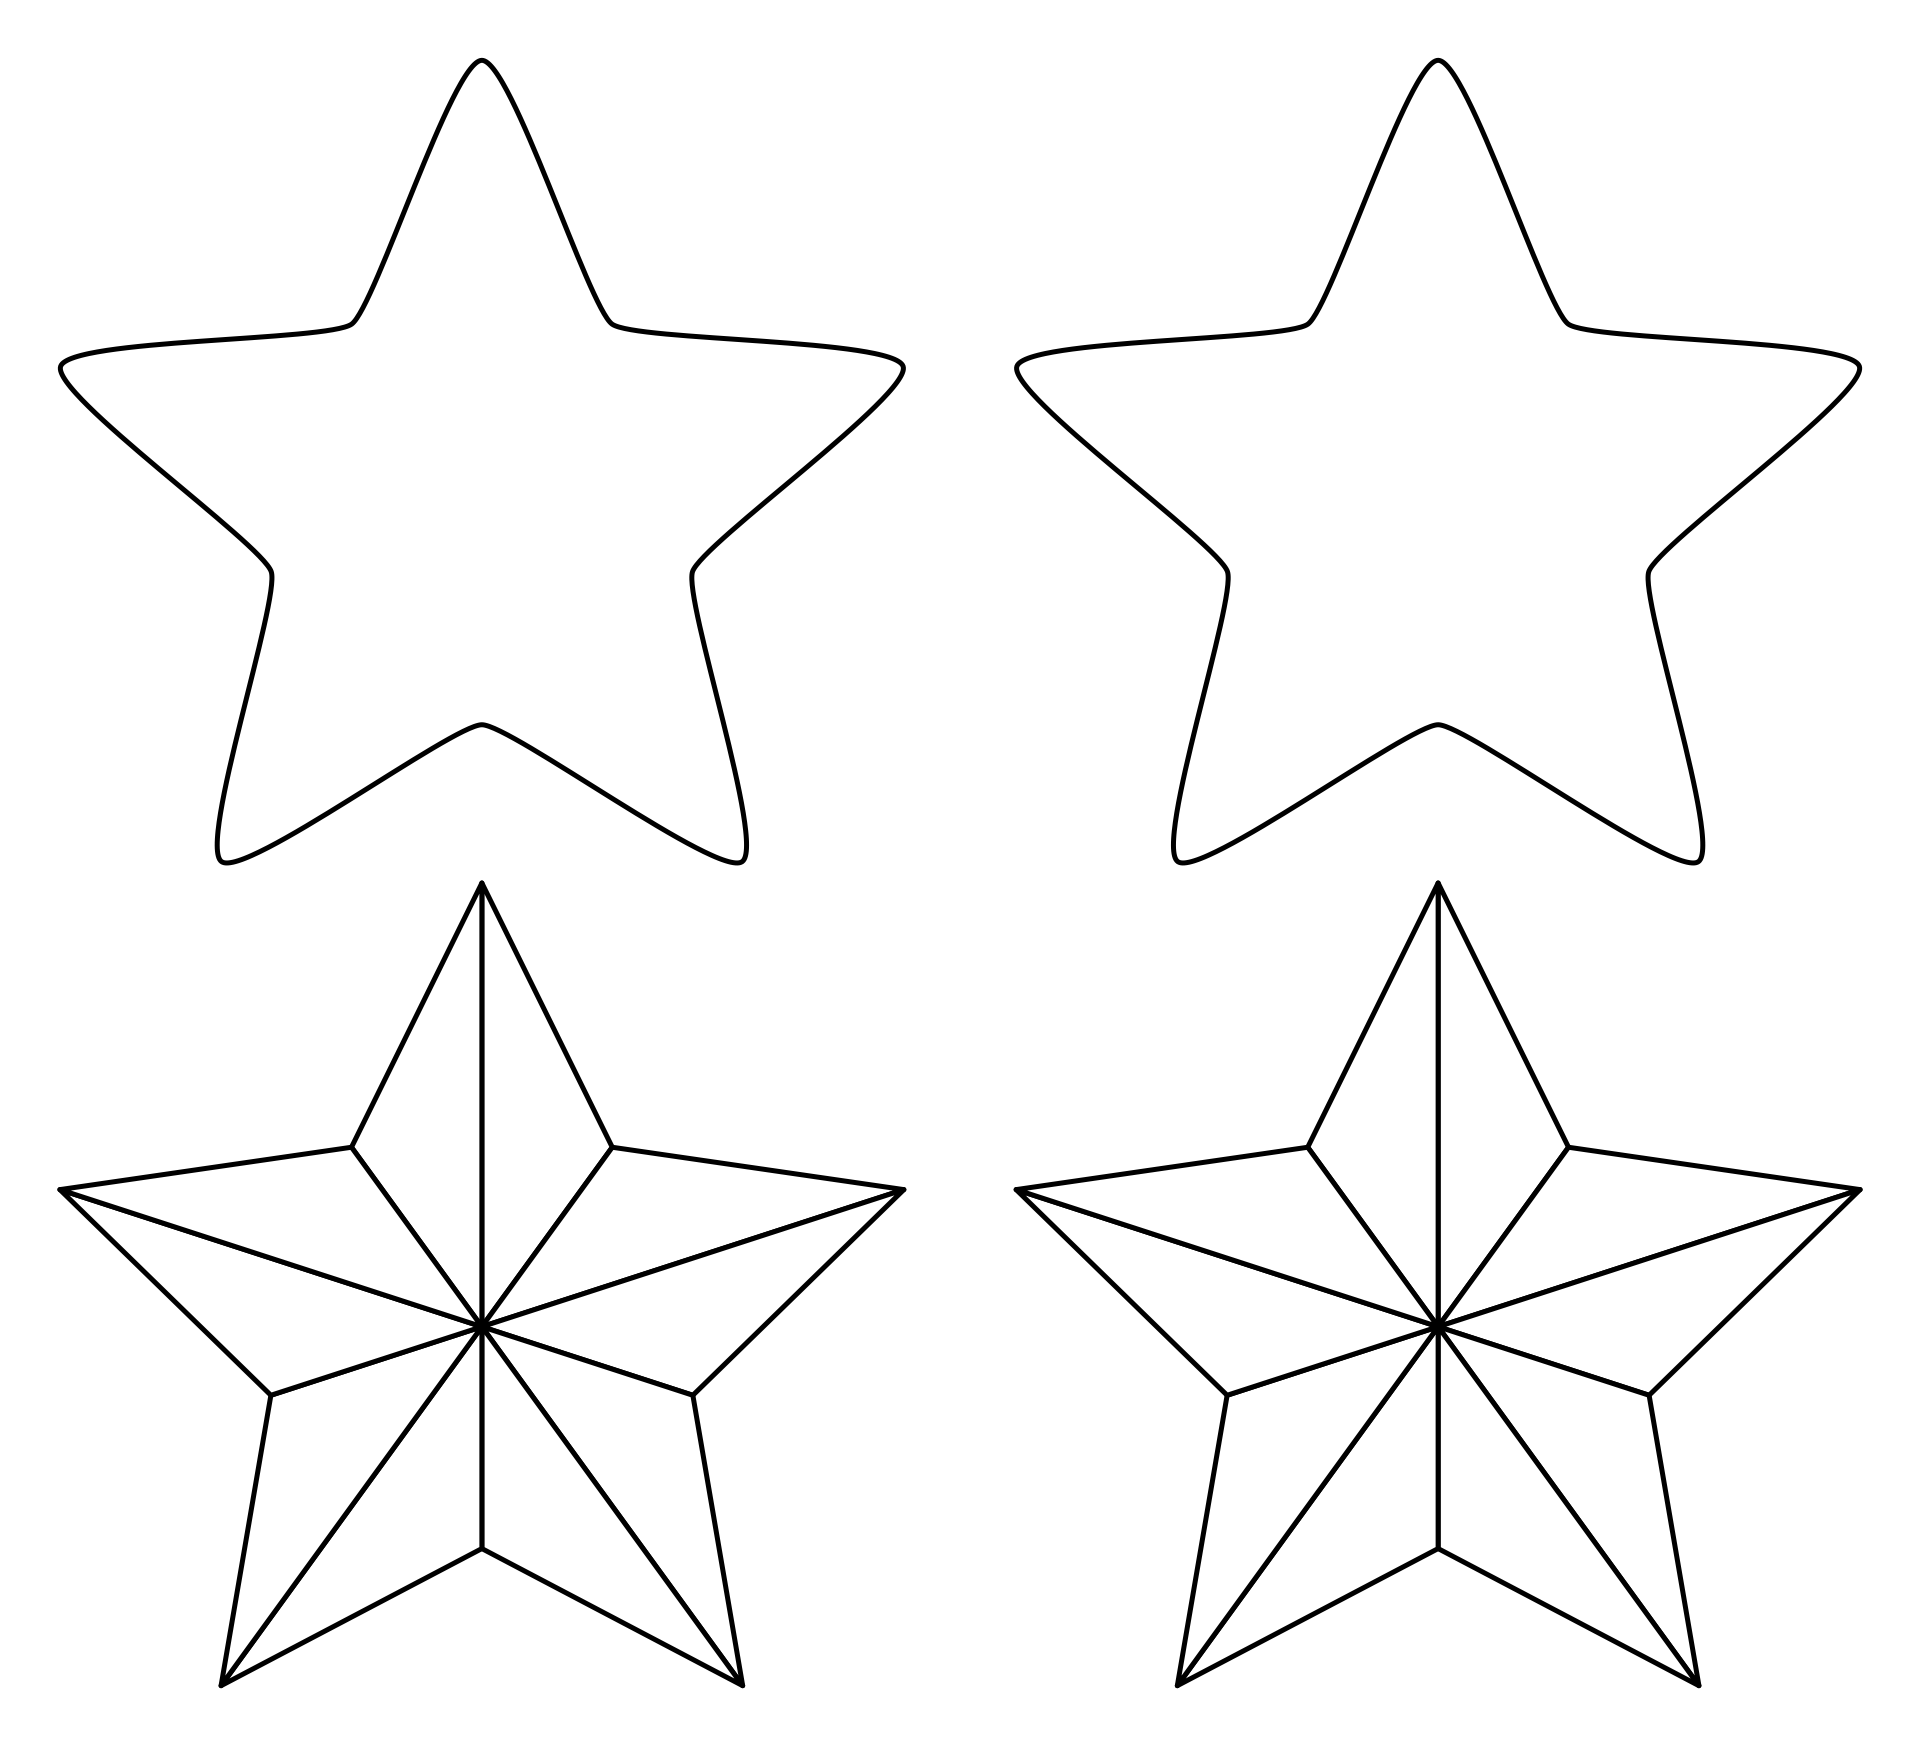 5-best-images-of-large-star-stencil-printable-large-star-template-5